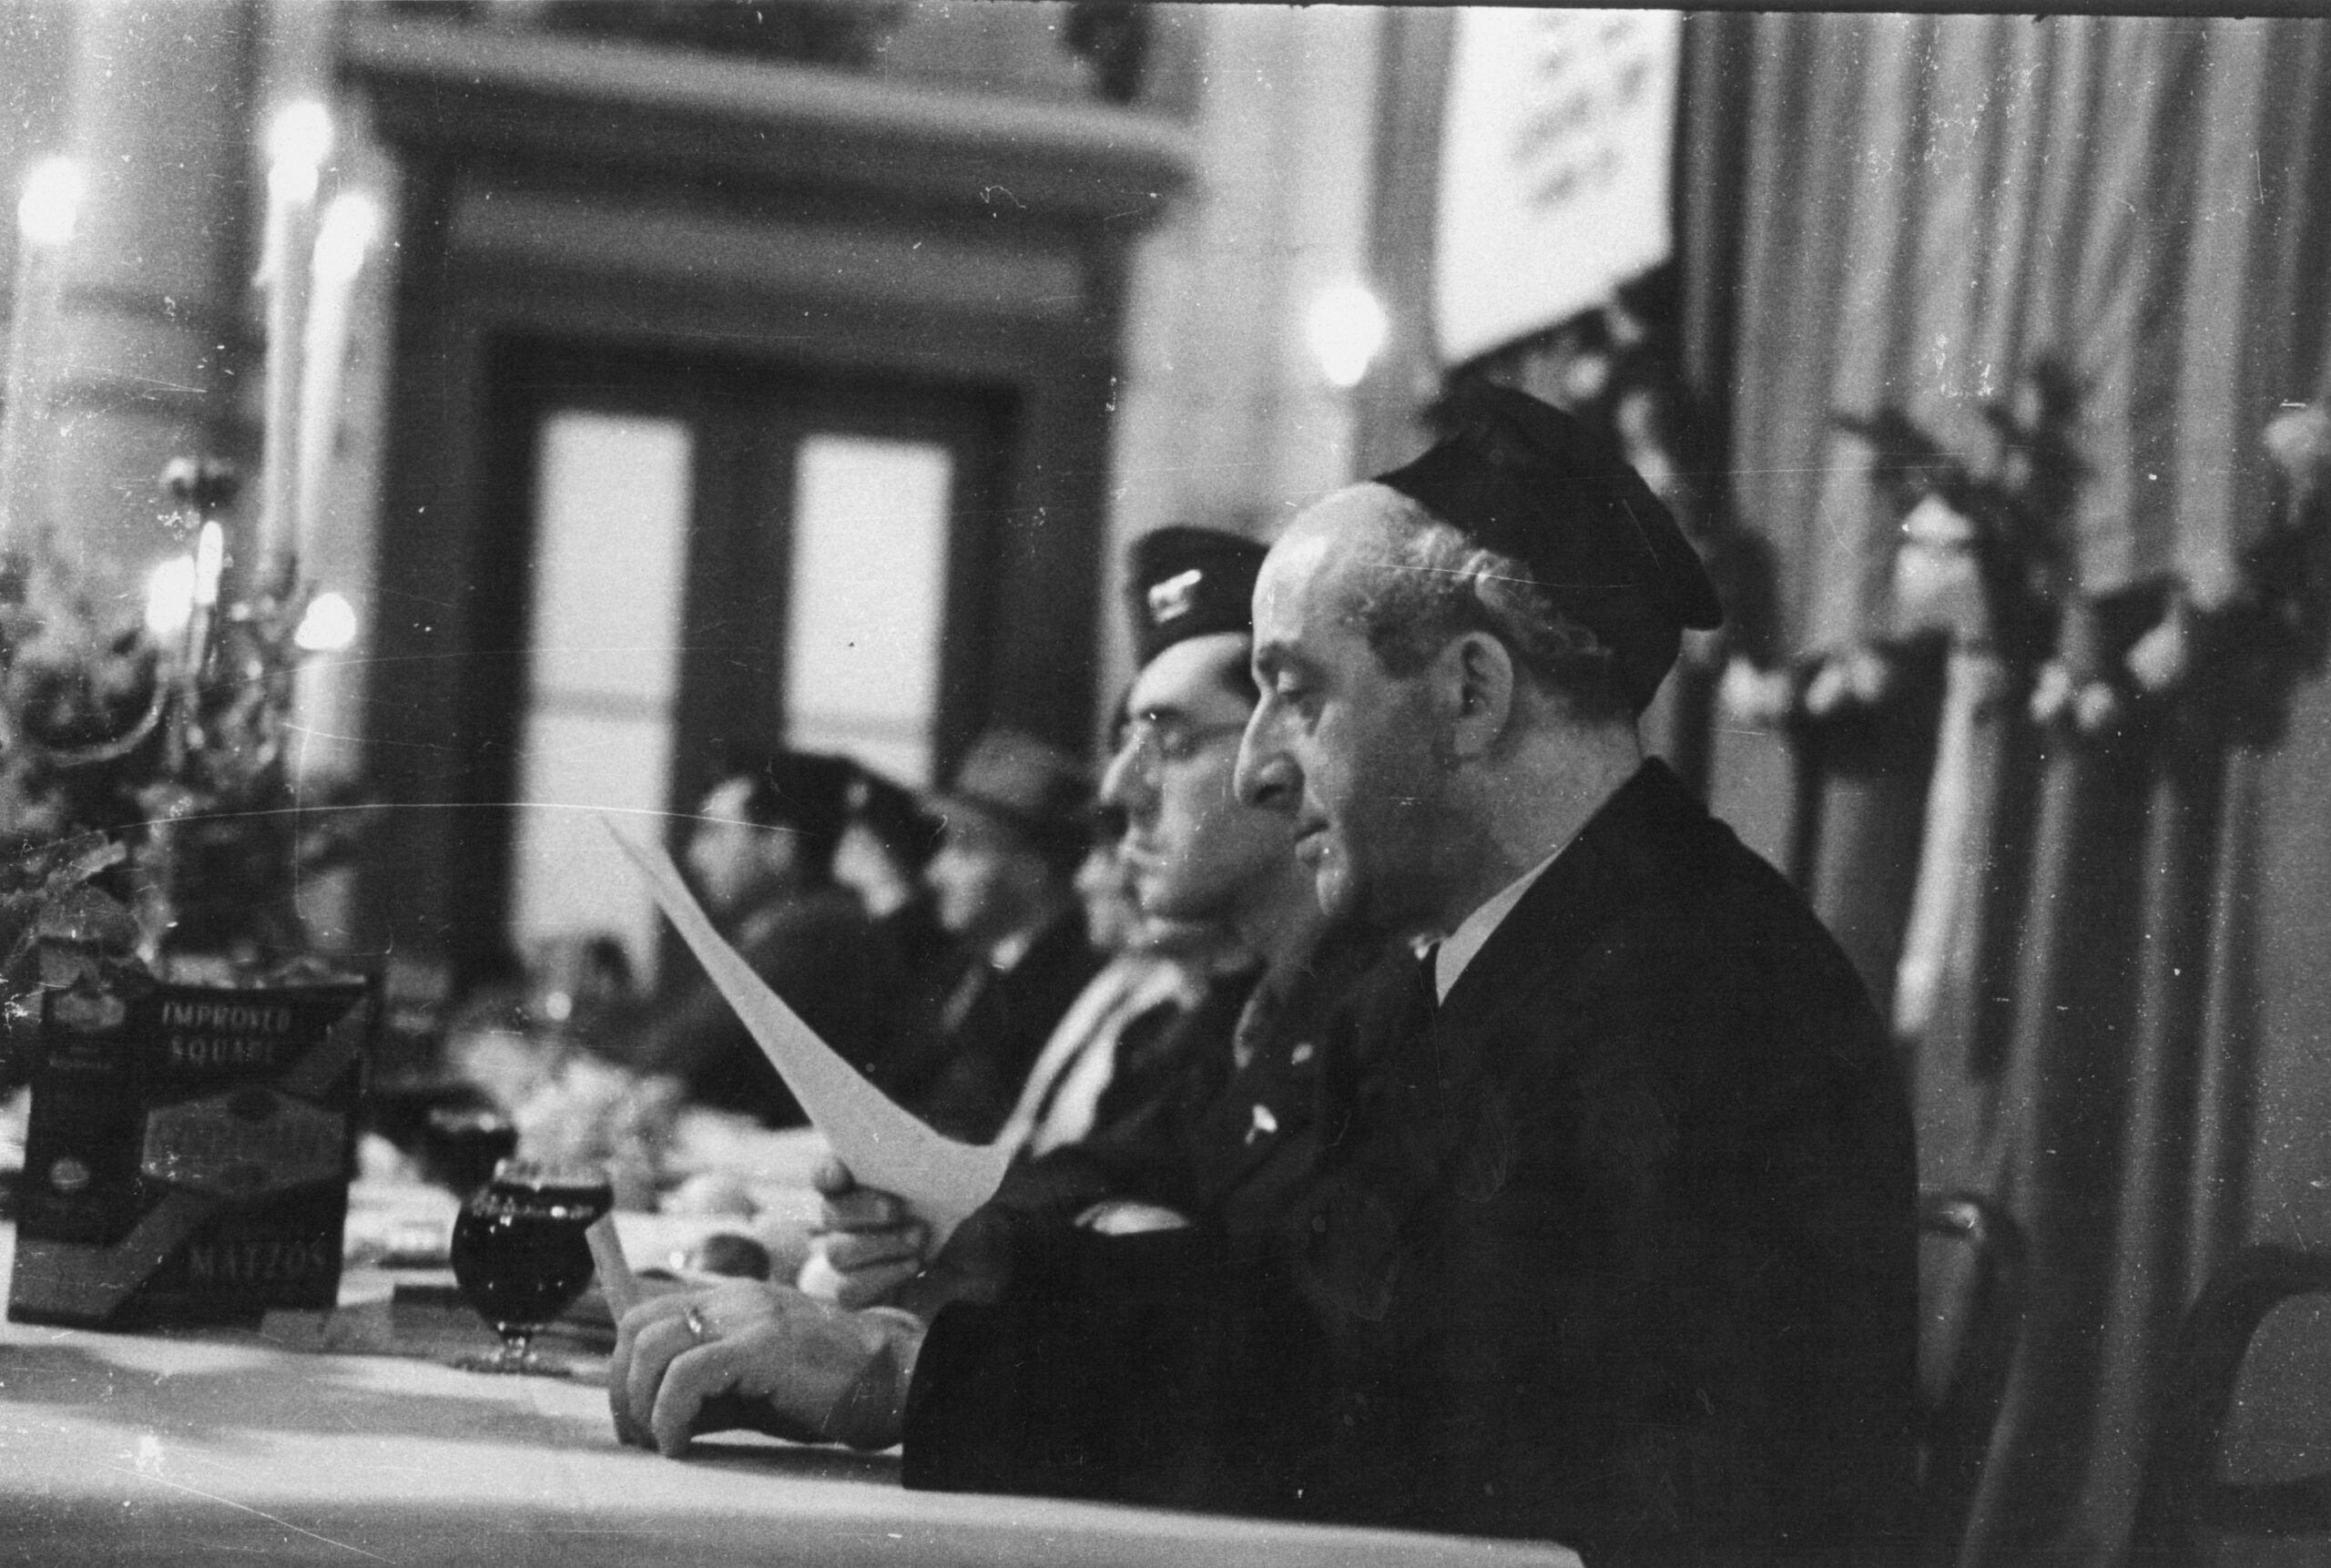 In the foreground: Jakob Matzner during Passover 1947 in the Wiesbaden synagogue. Collection Jewish Community Wiesbaden